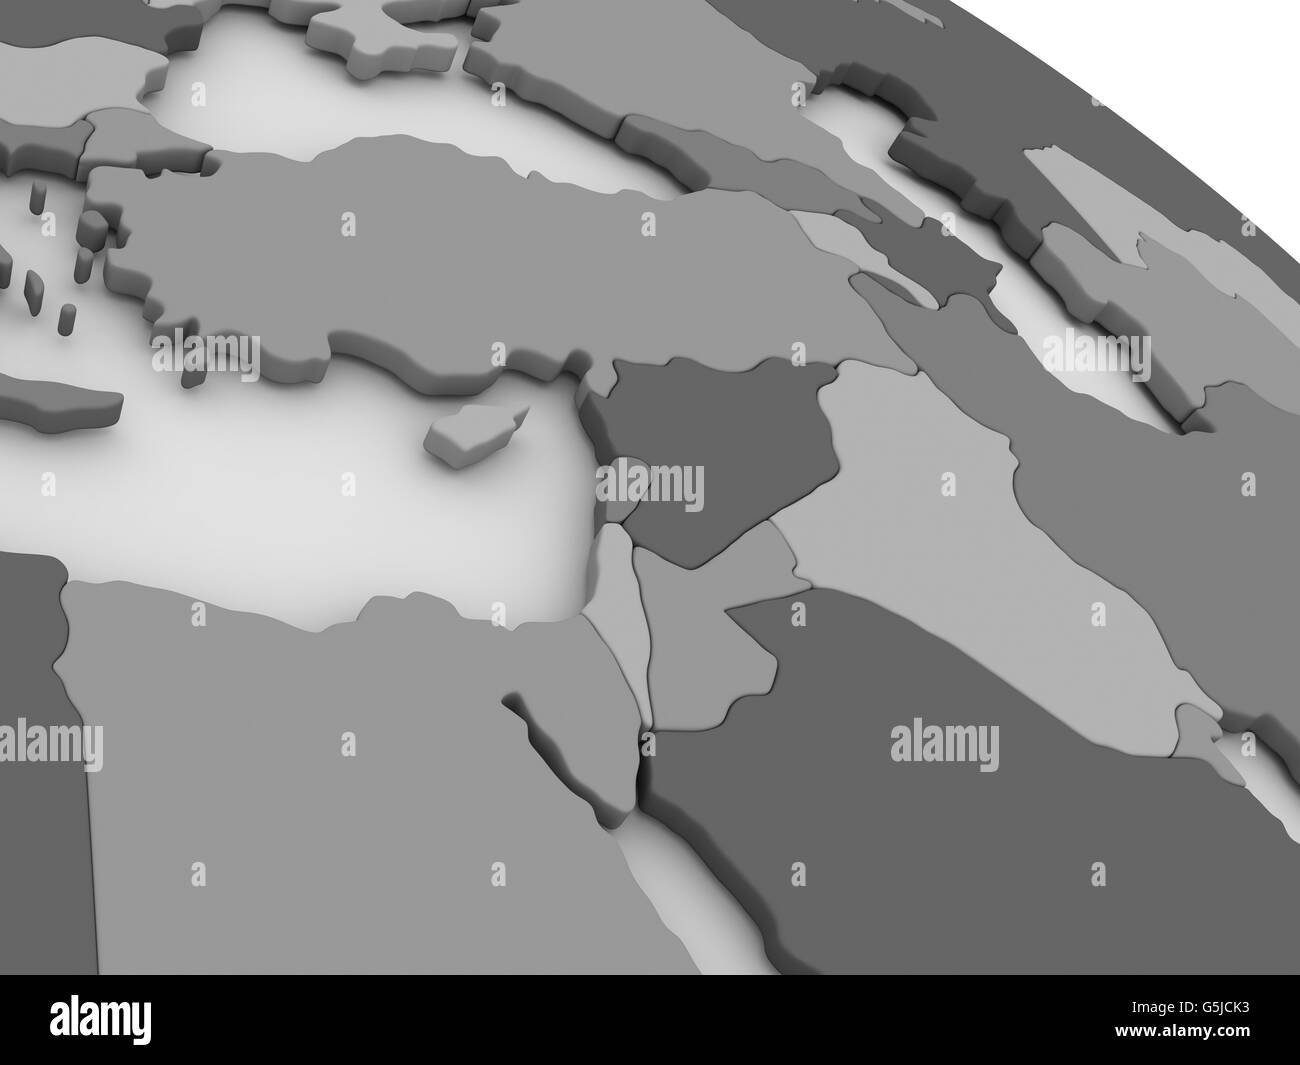 Map of Middle East on grey model of Earth. 3D illustration Stock Photo